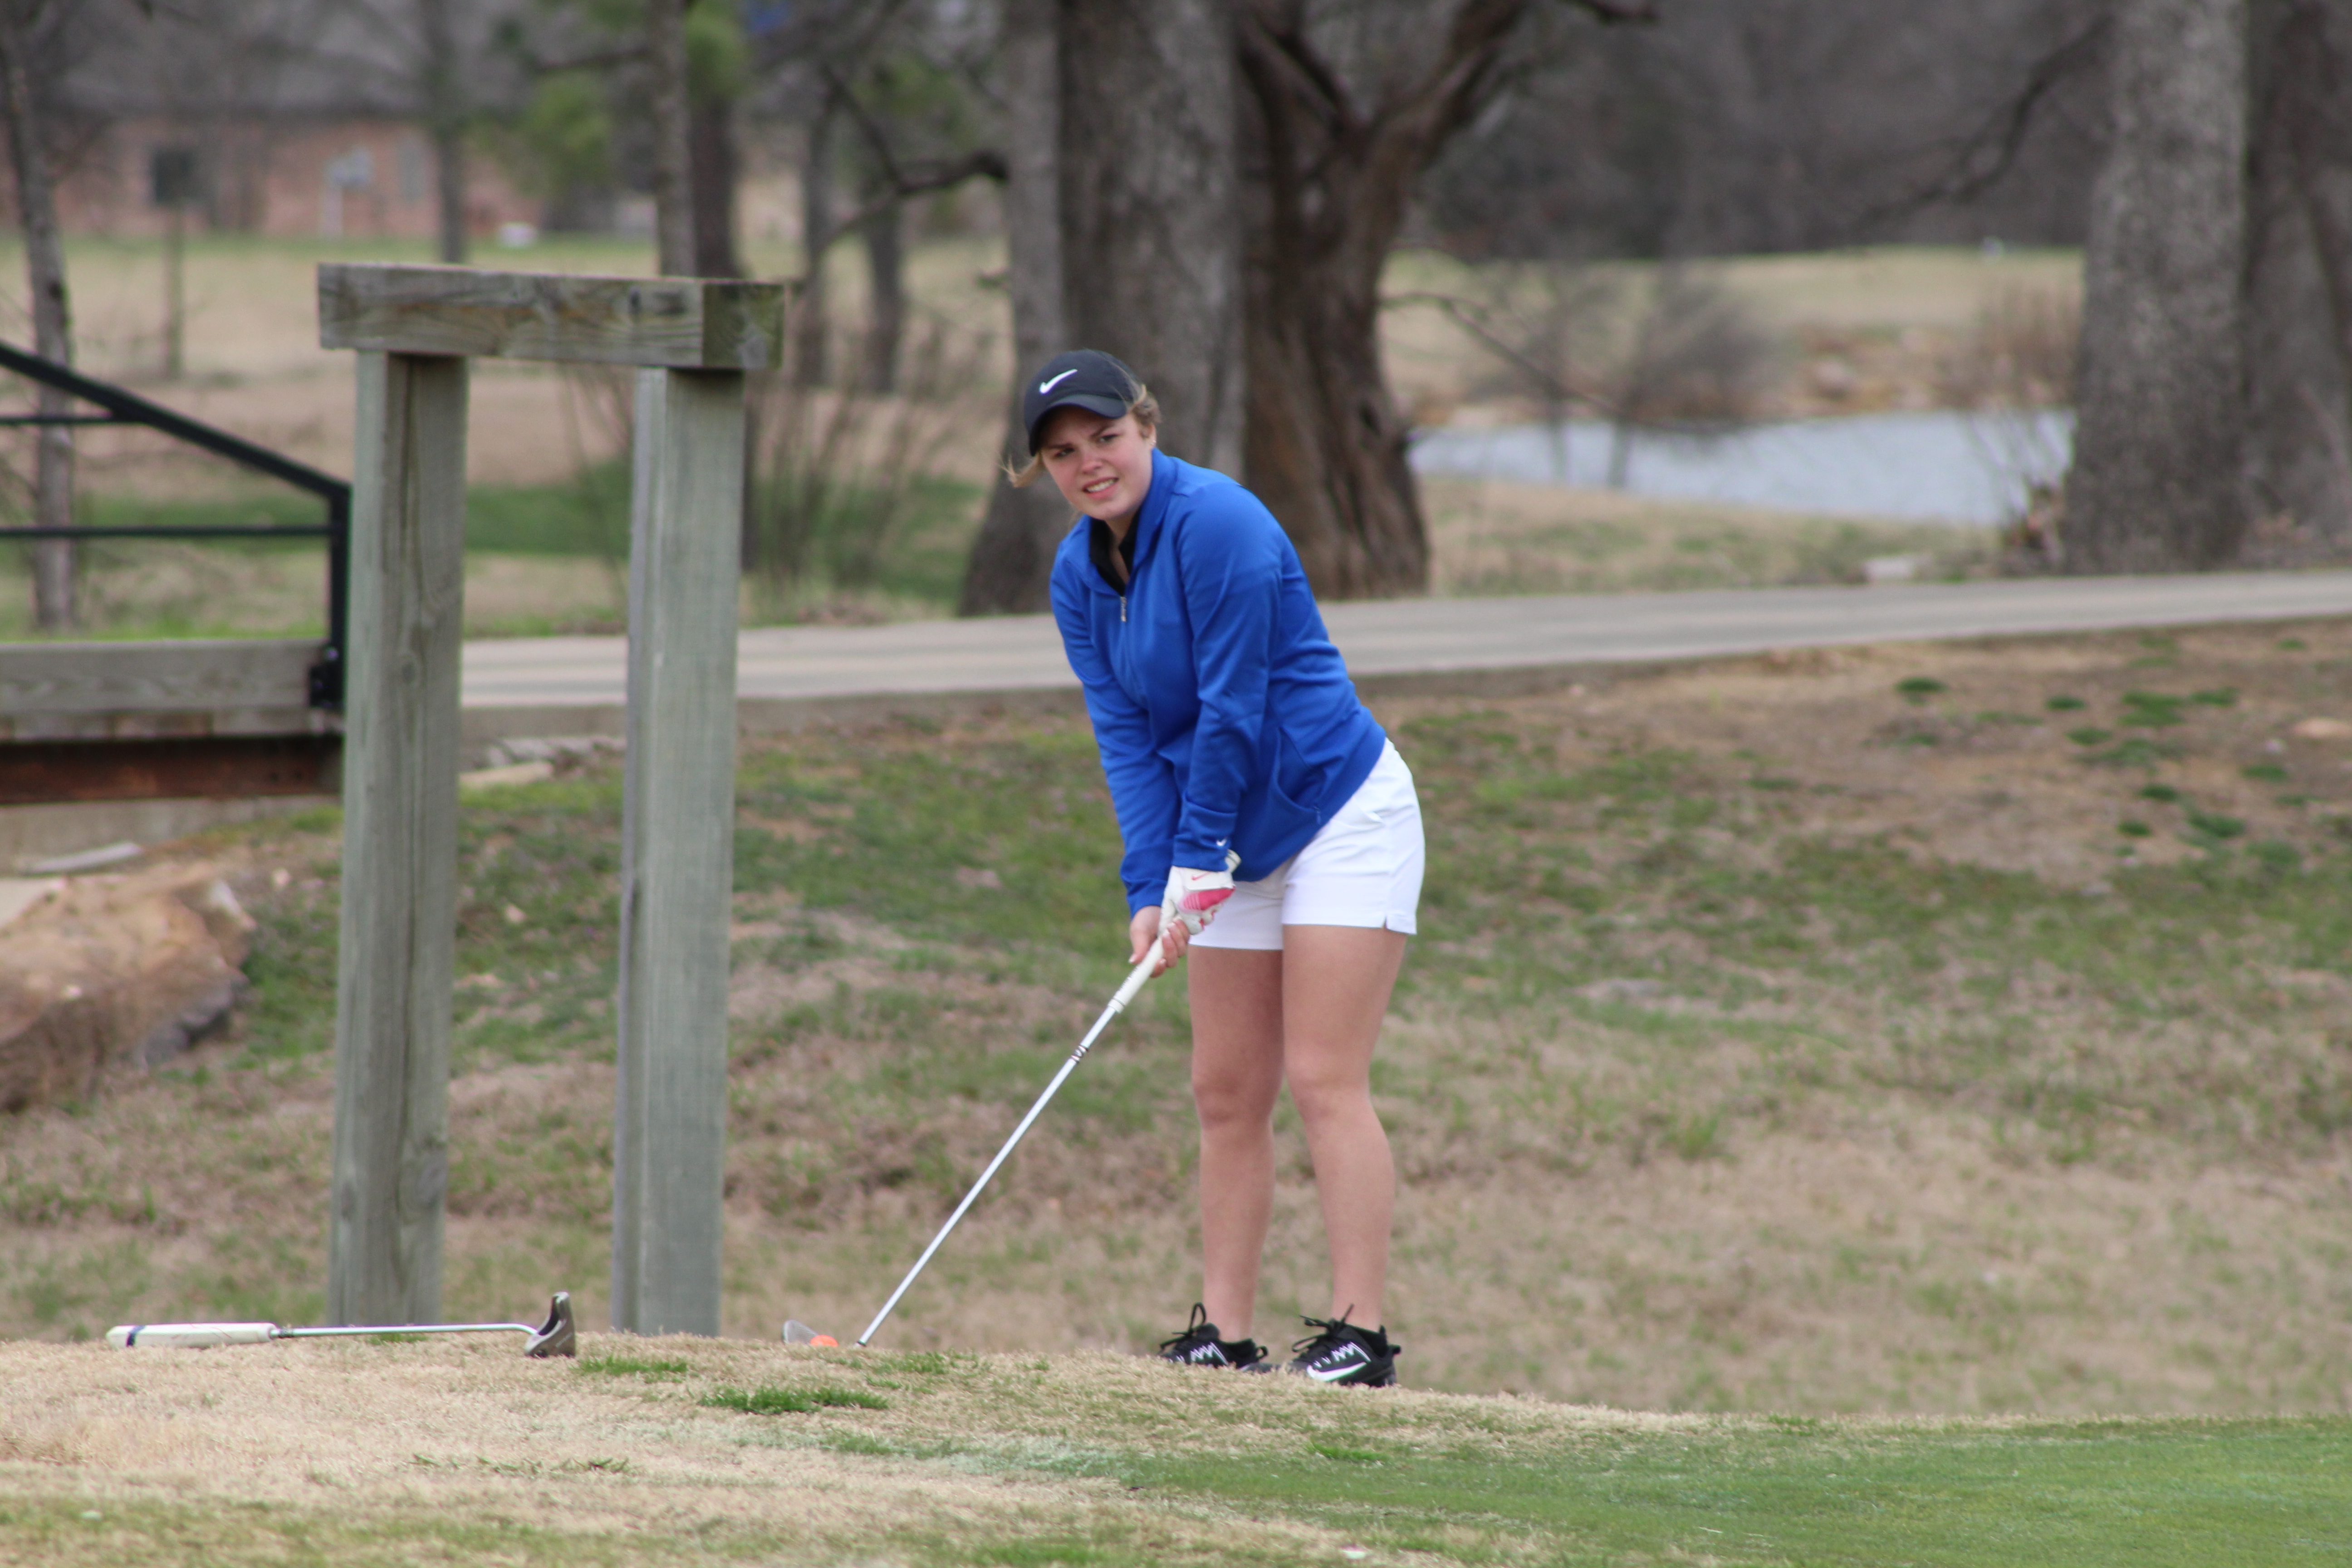 Results for Sulphur Springs Girl’s Golf Team at Sulphur Springs Country Club Tournament